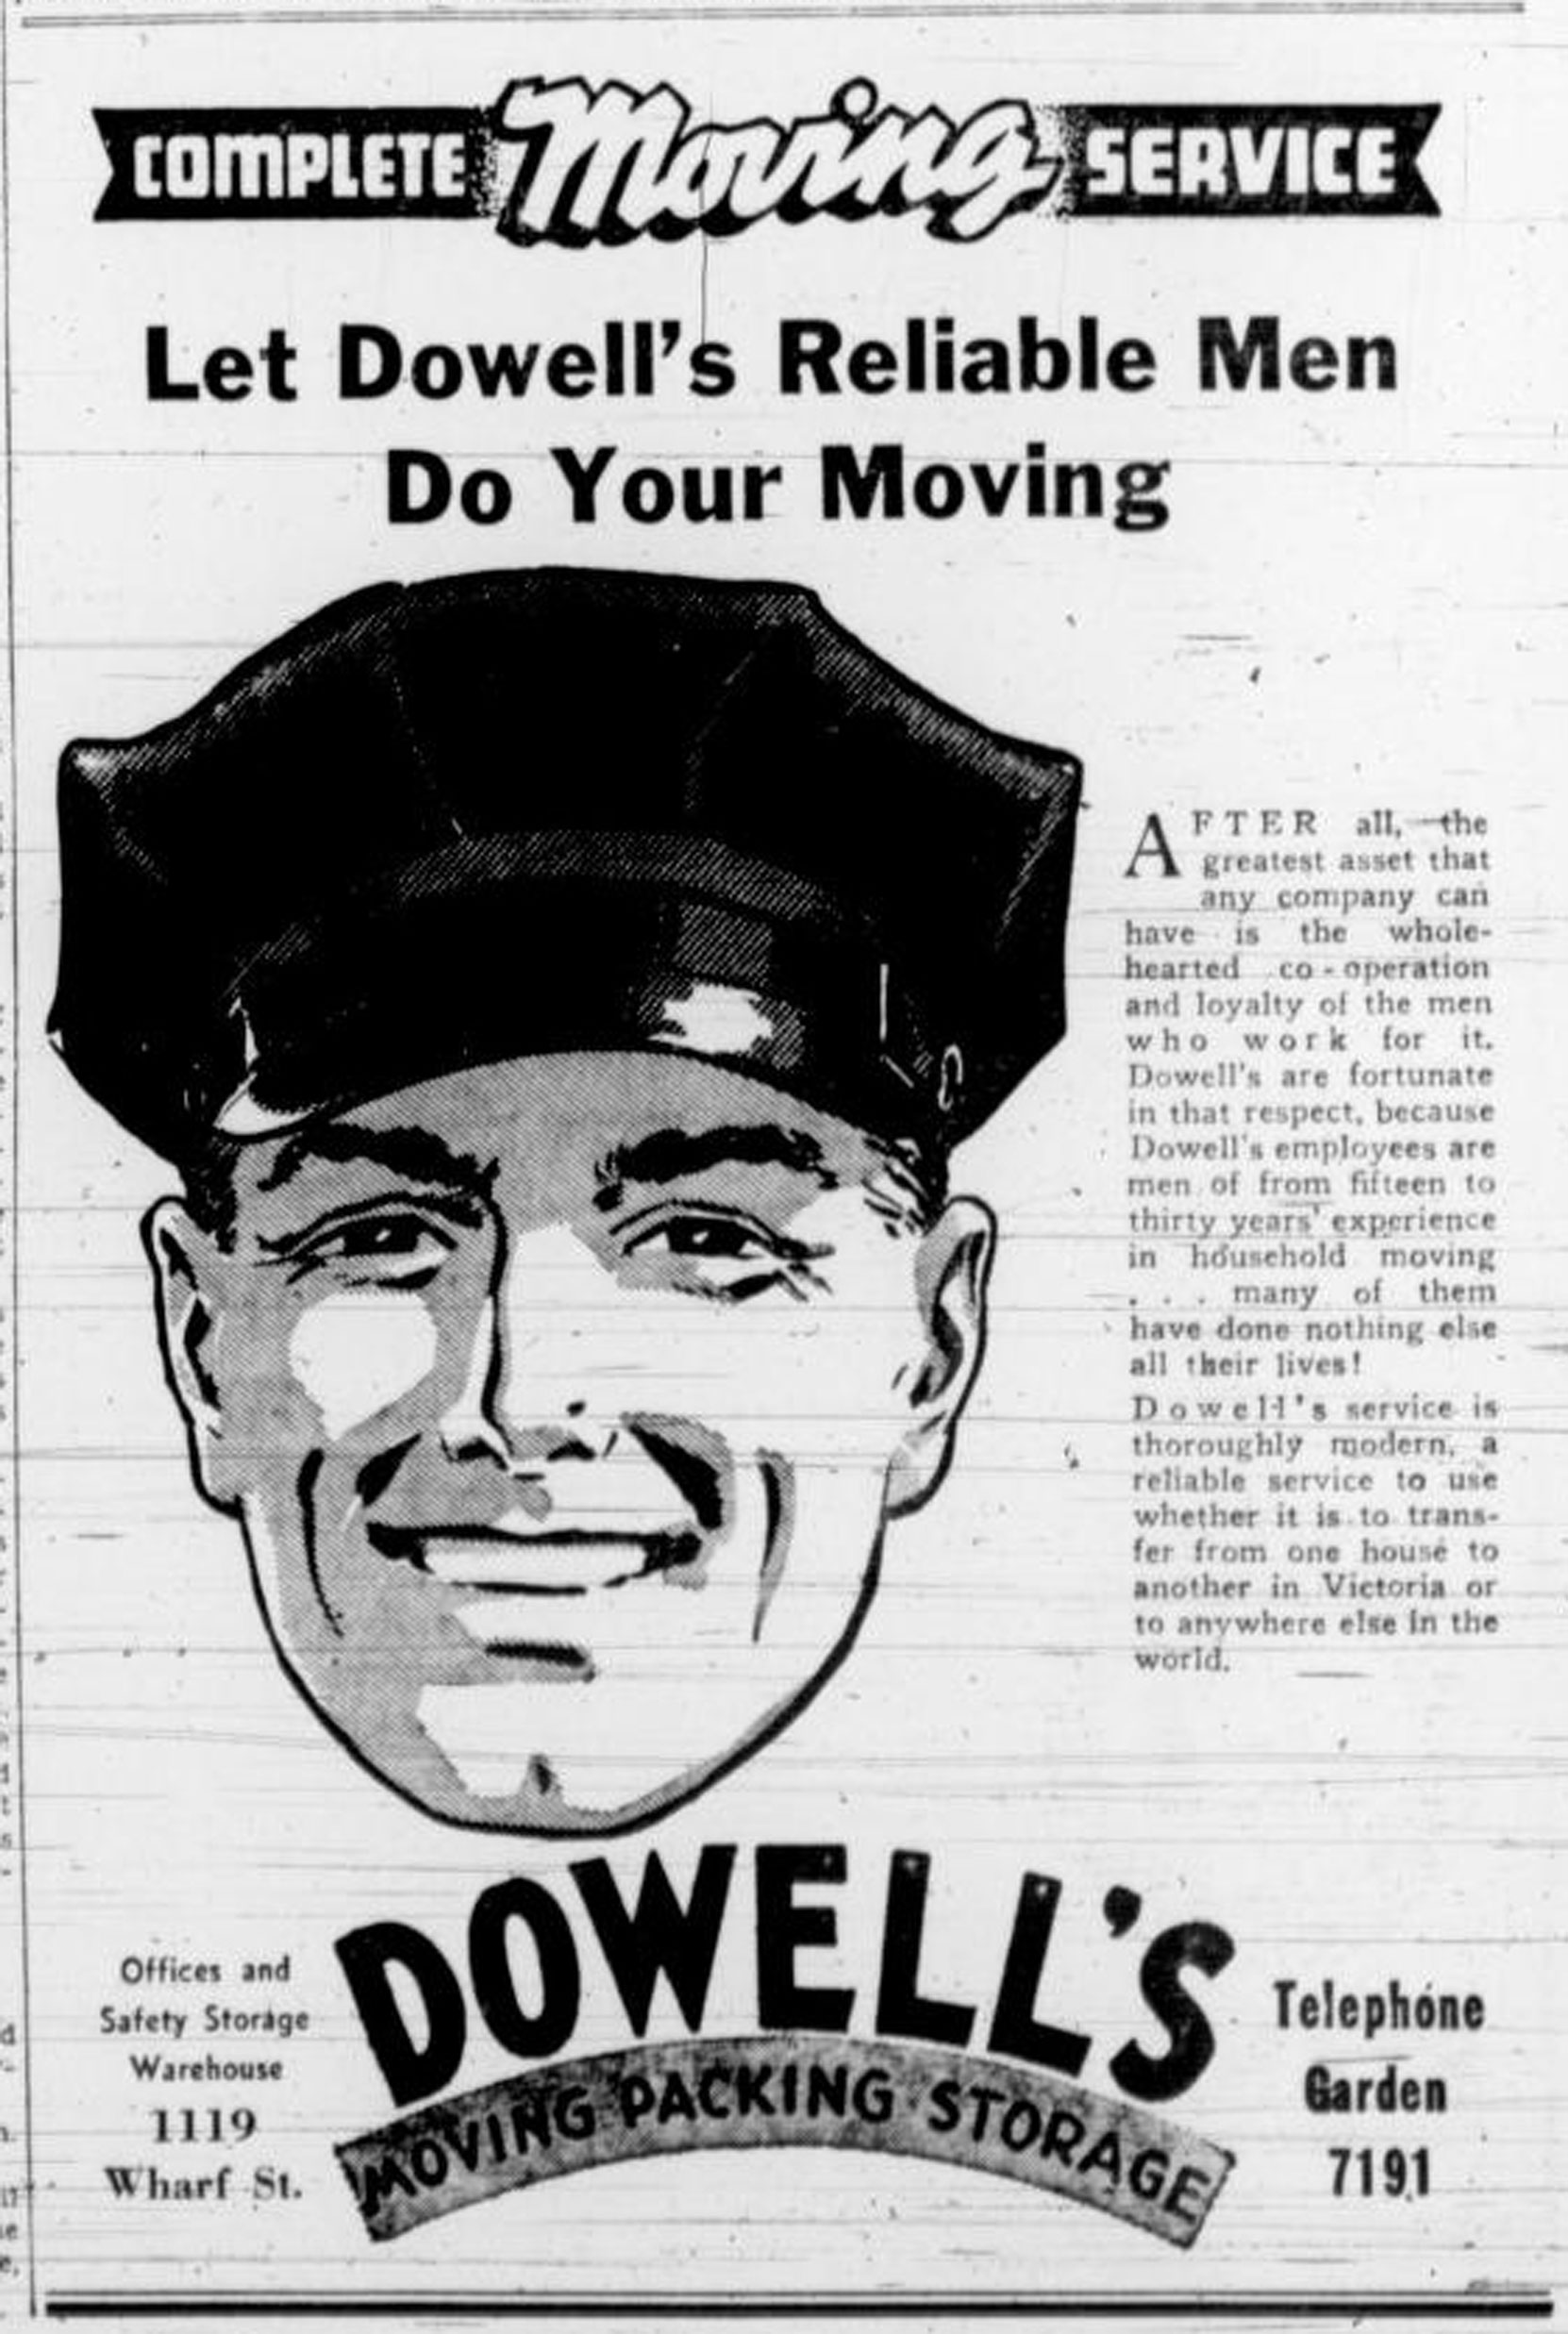 1938 advertisement for Dowell's Moving, then located in the Rithet Building at 1117 Wharf Street.